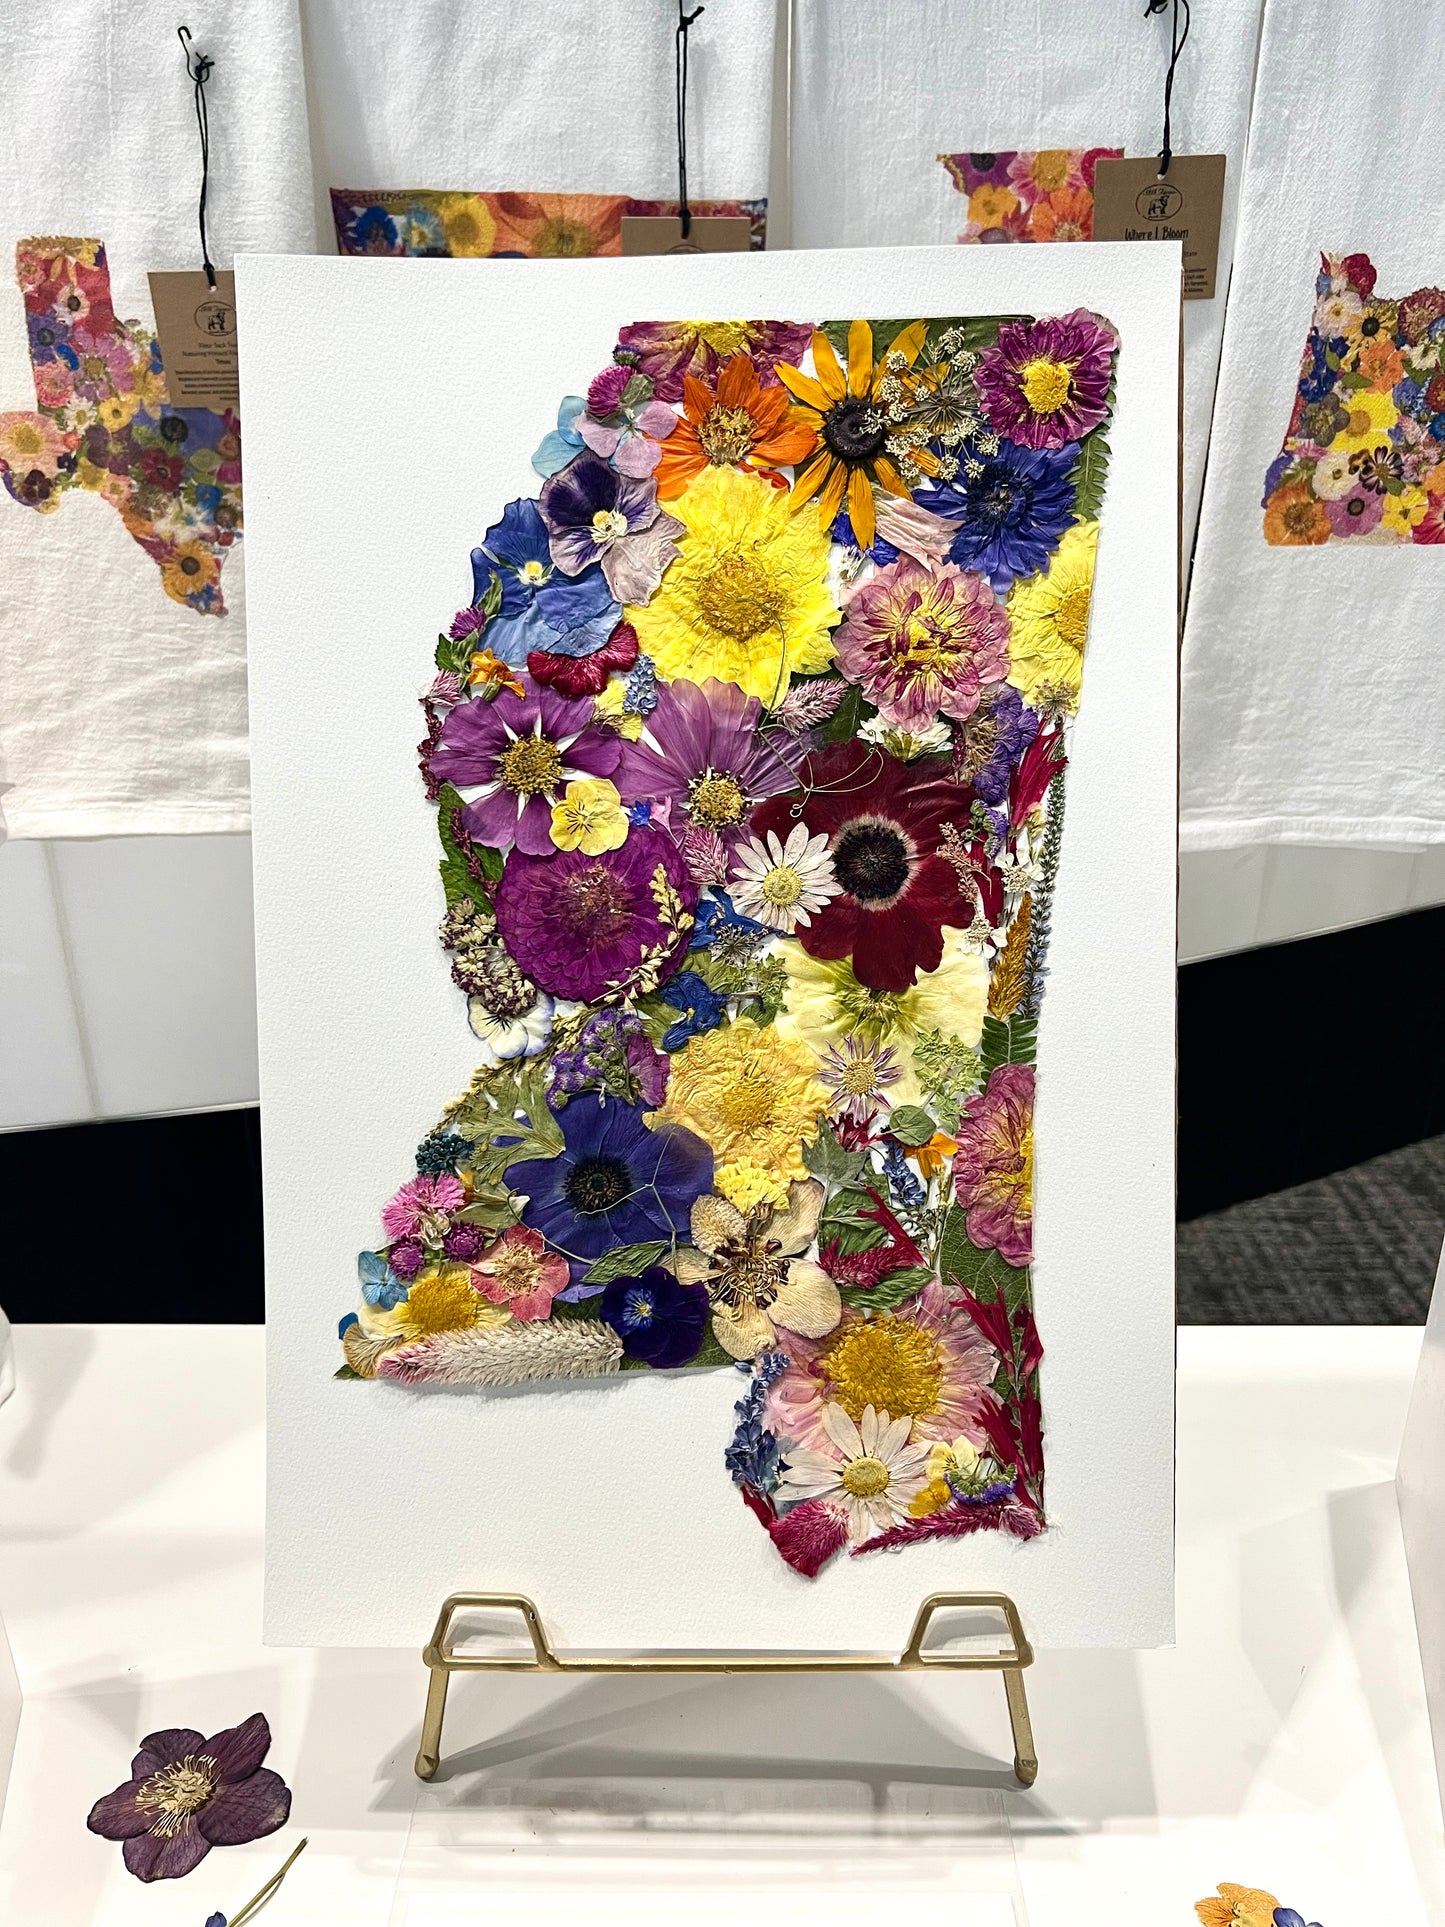 Mississippi Themed Giclée Print Featuring Dried, Pressed Flowers - "Where I Bloom" Collection Giclee Art Print 1818 Farms   